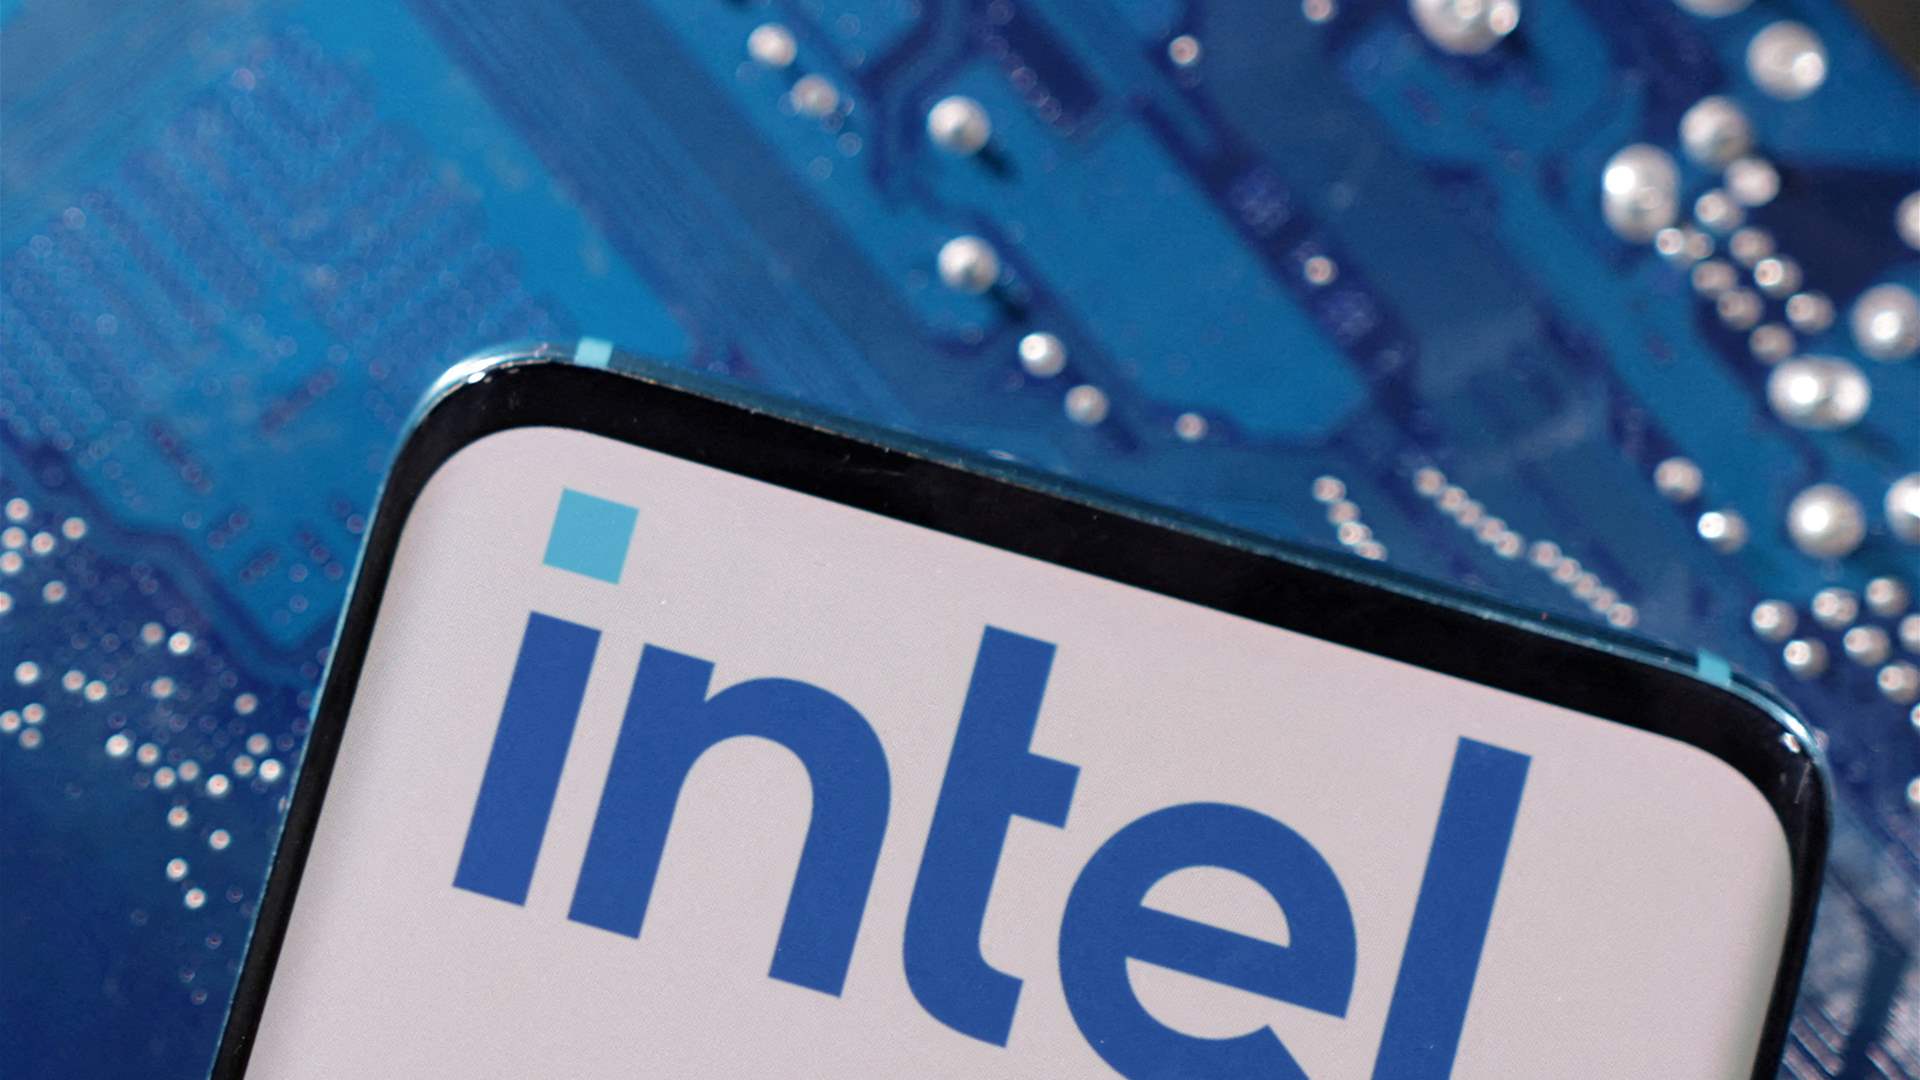 Intel gets nearly $20 billion from Biden to boost US chip output